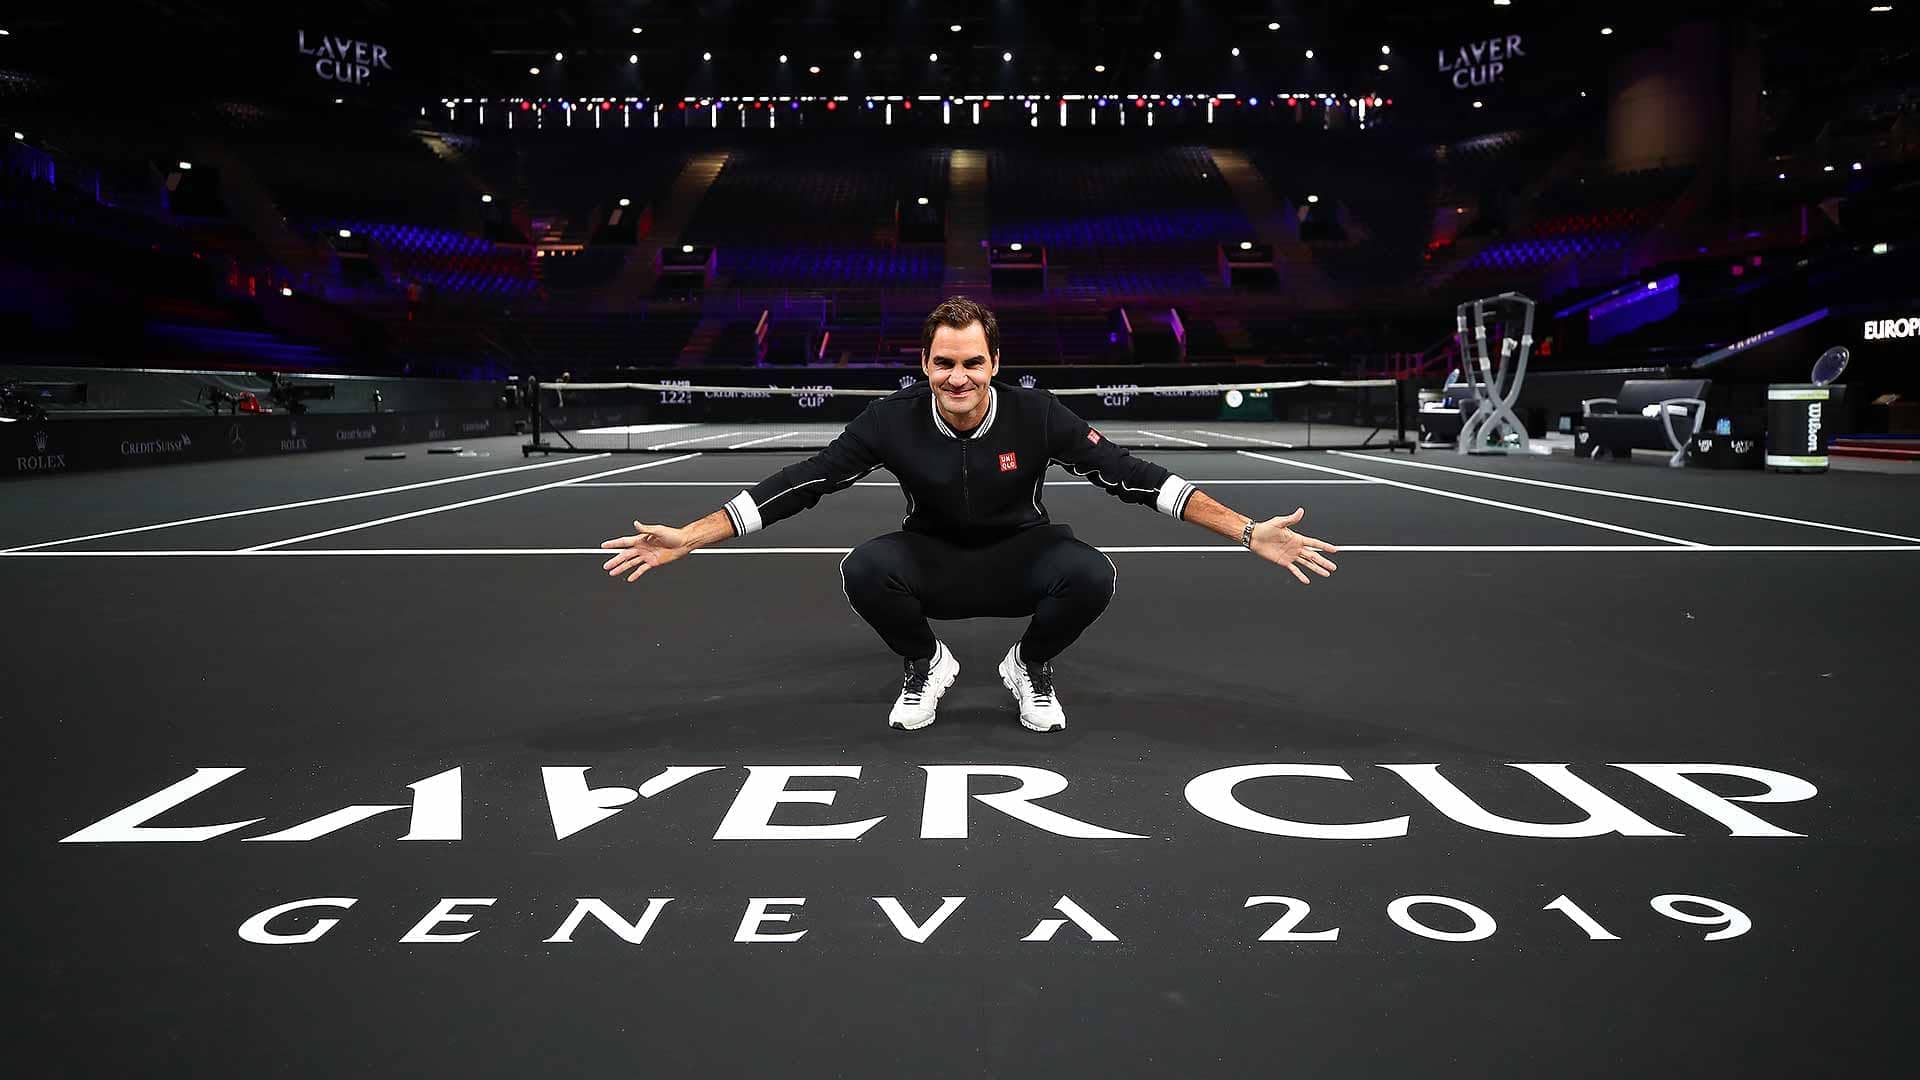 federer-laver-cup-2019-preview-court.jpg